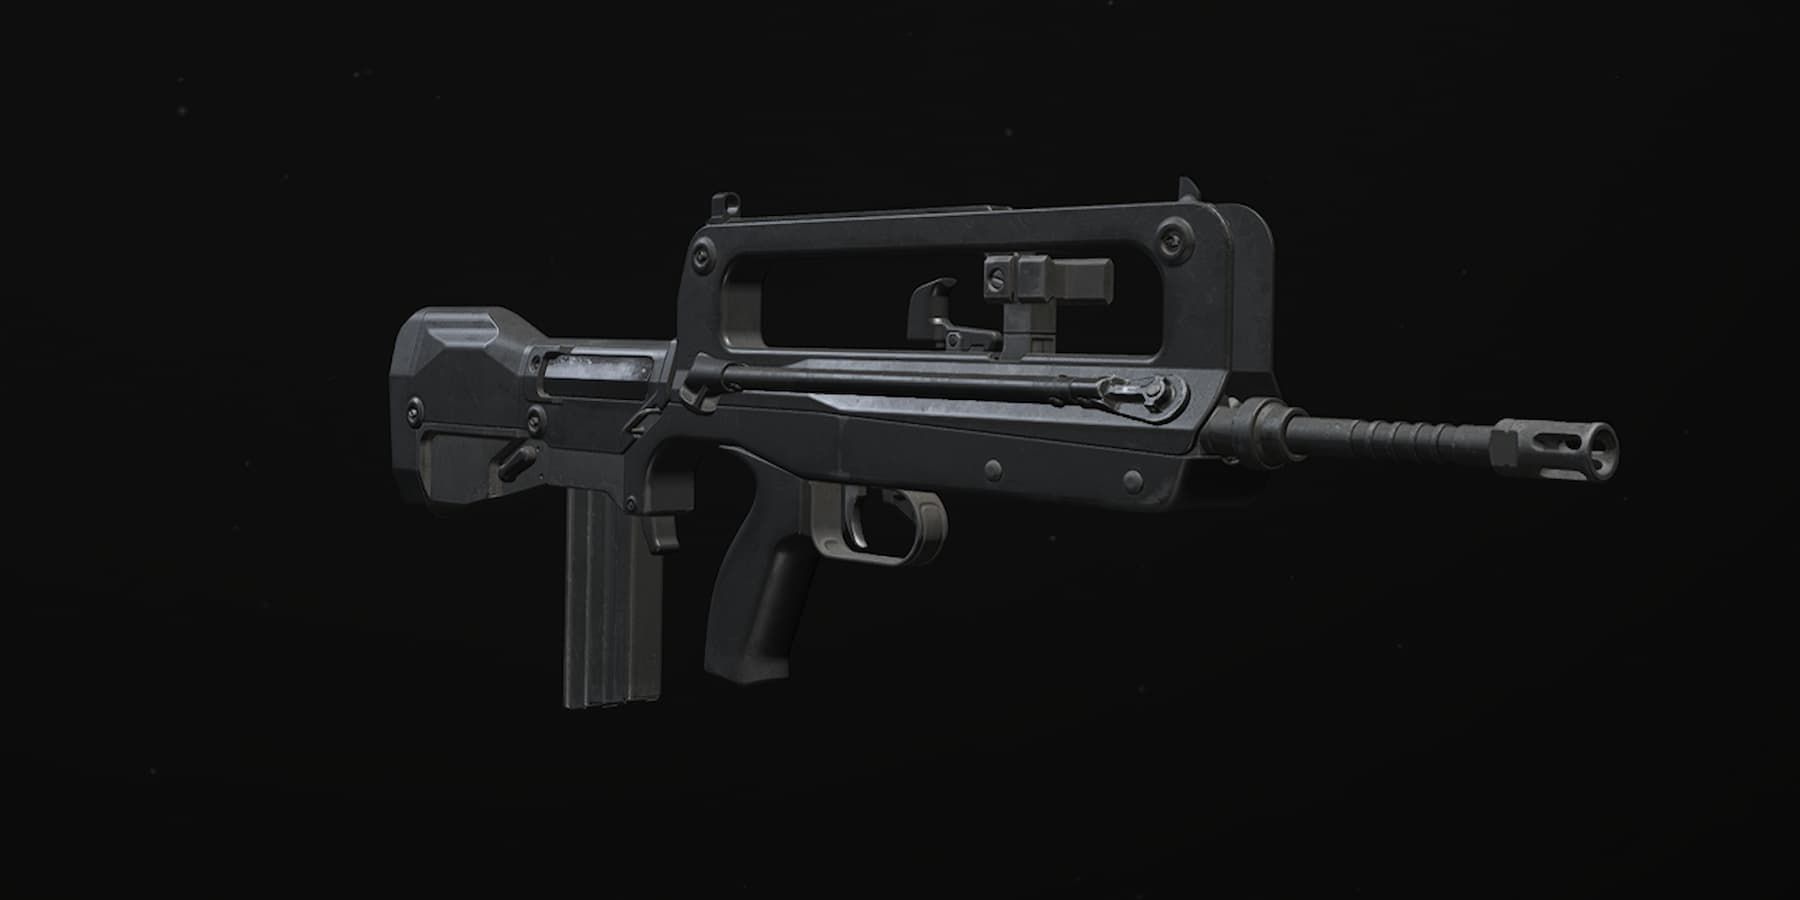 The FR 5.56 in MW3